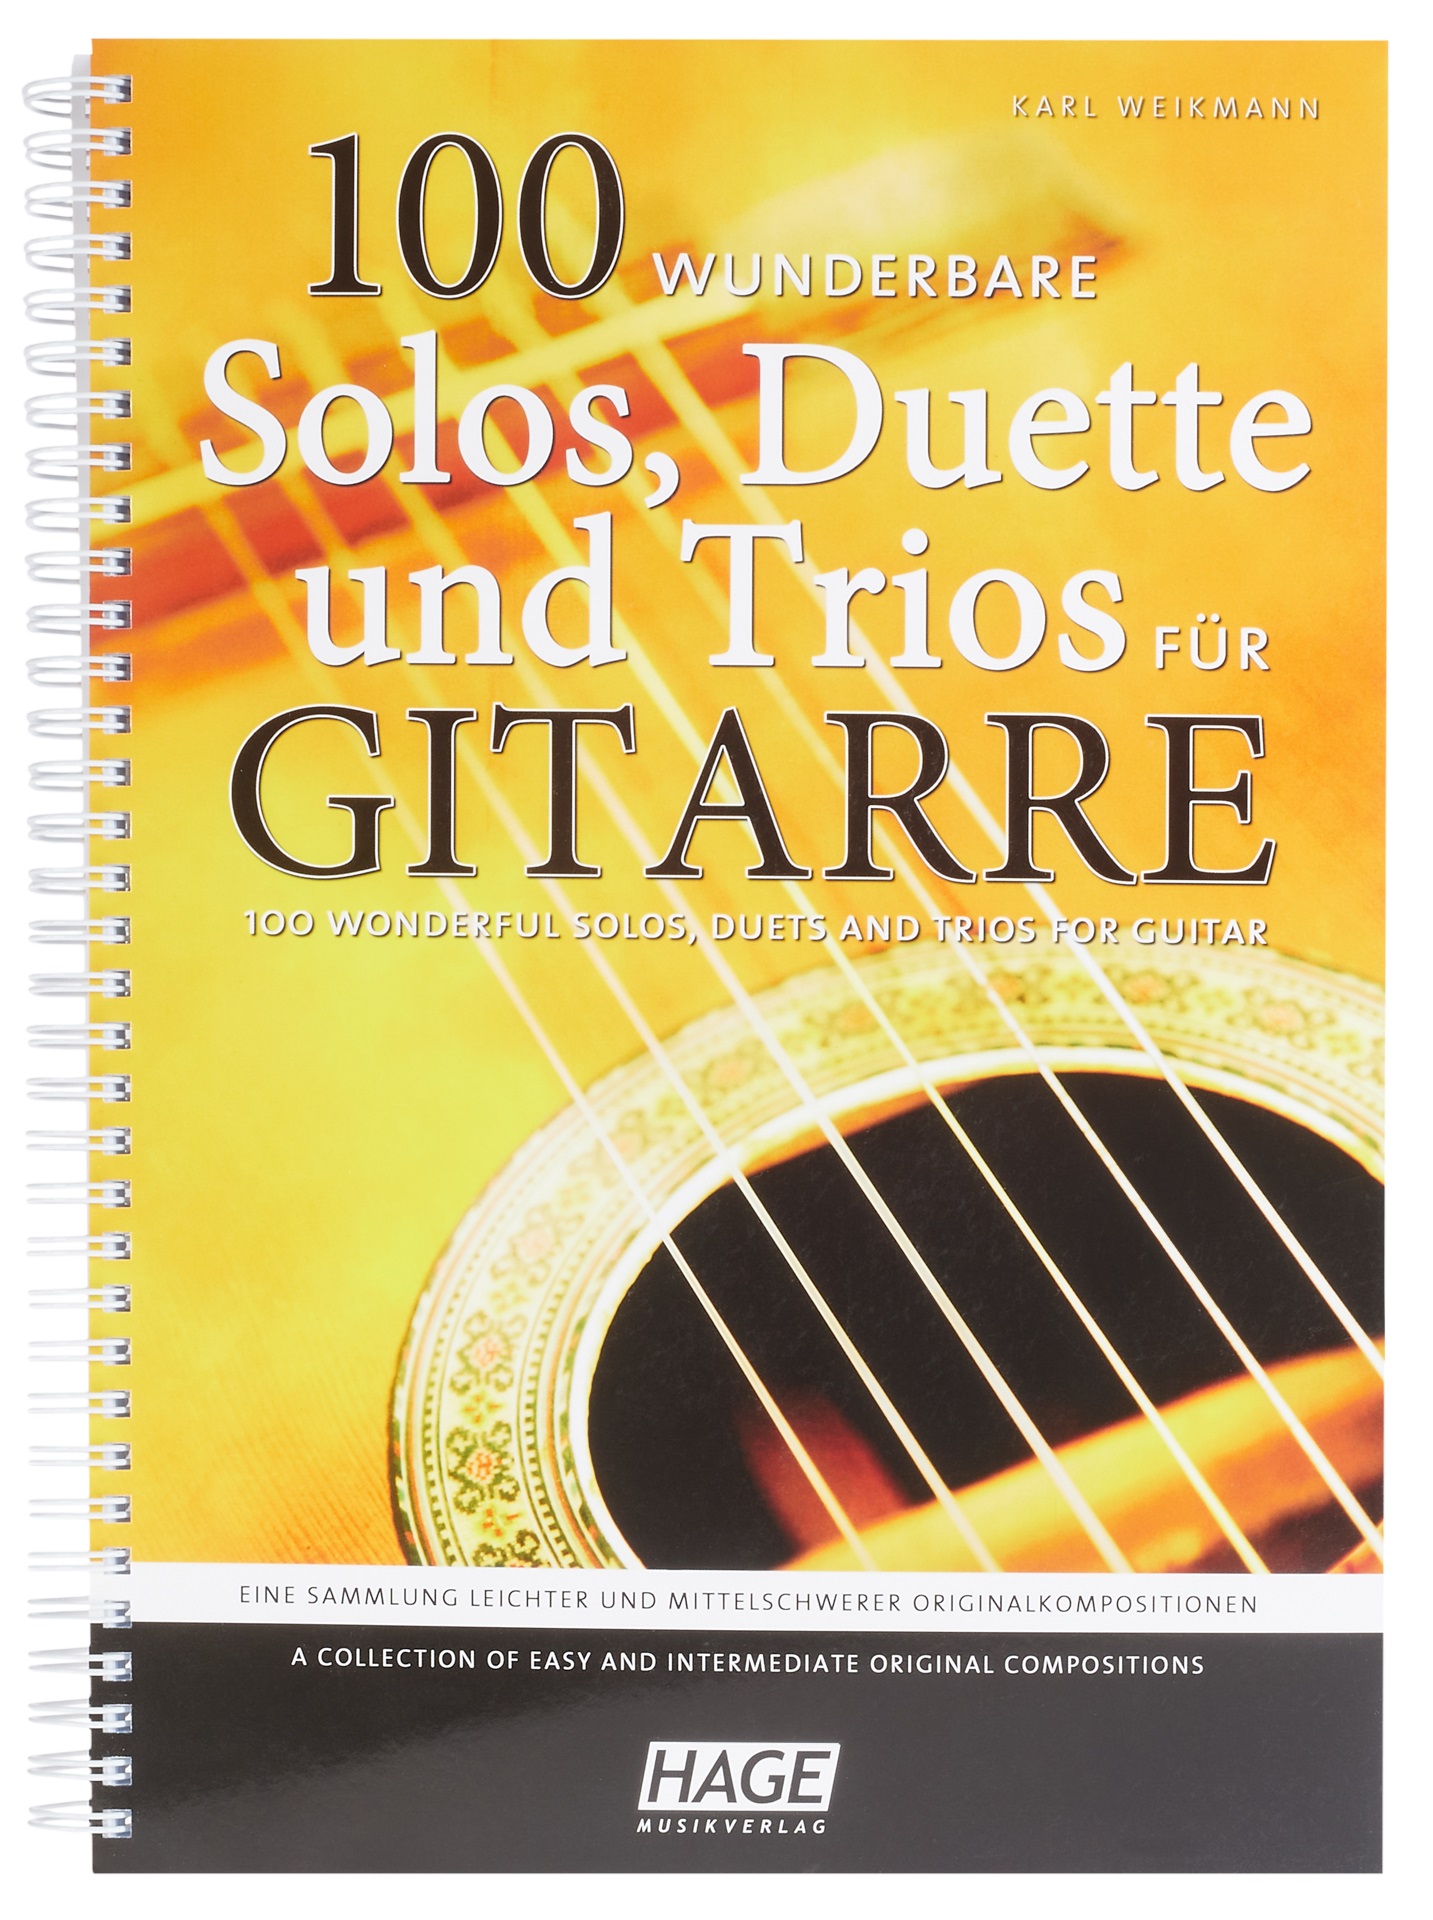 Fotografie MS 100 wonderful solos, duets and trios for guitar